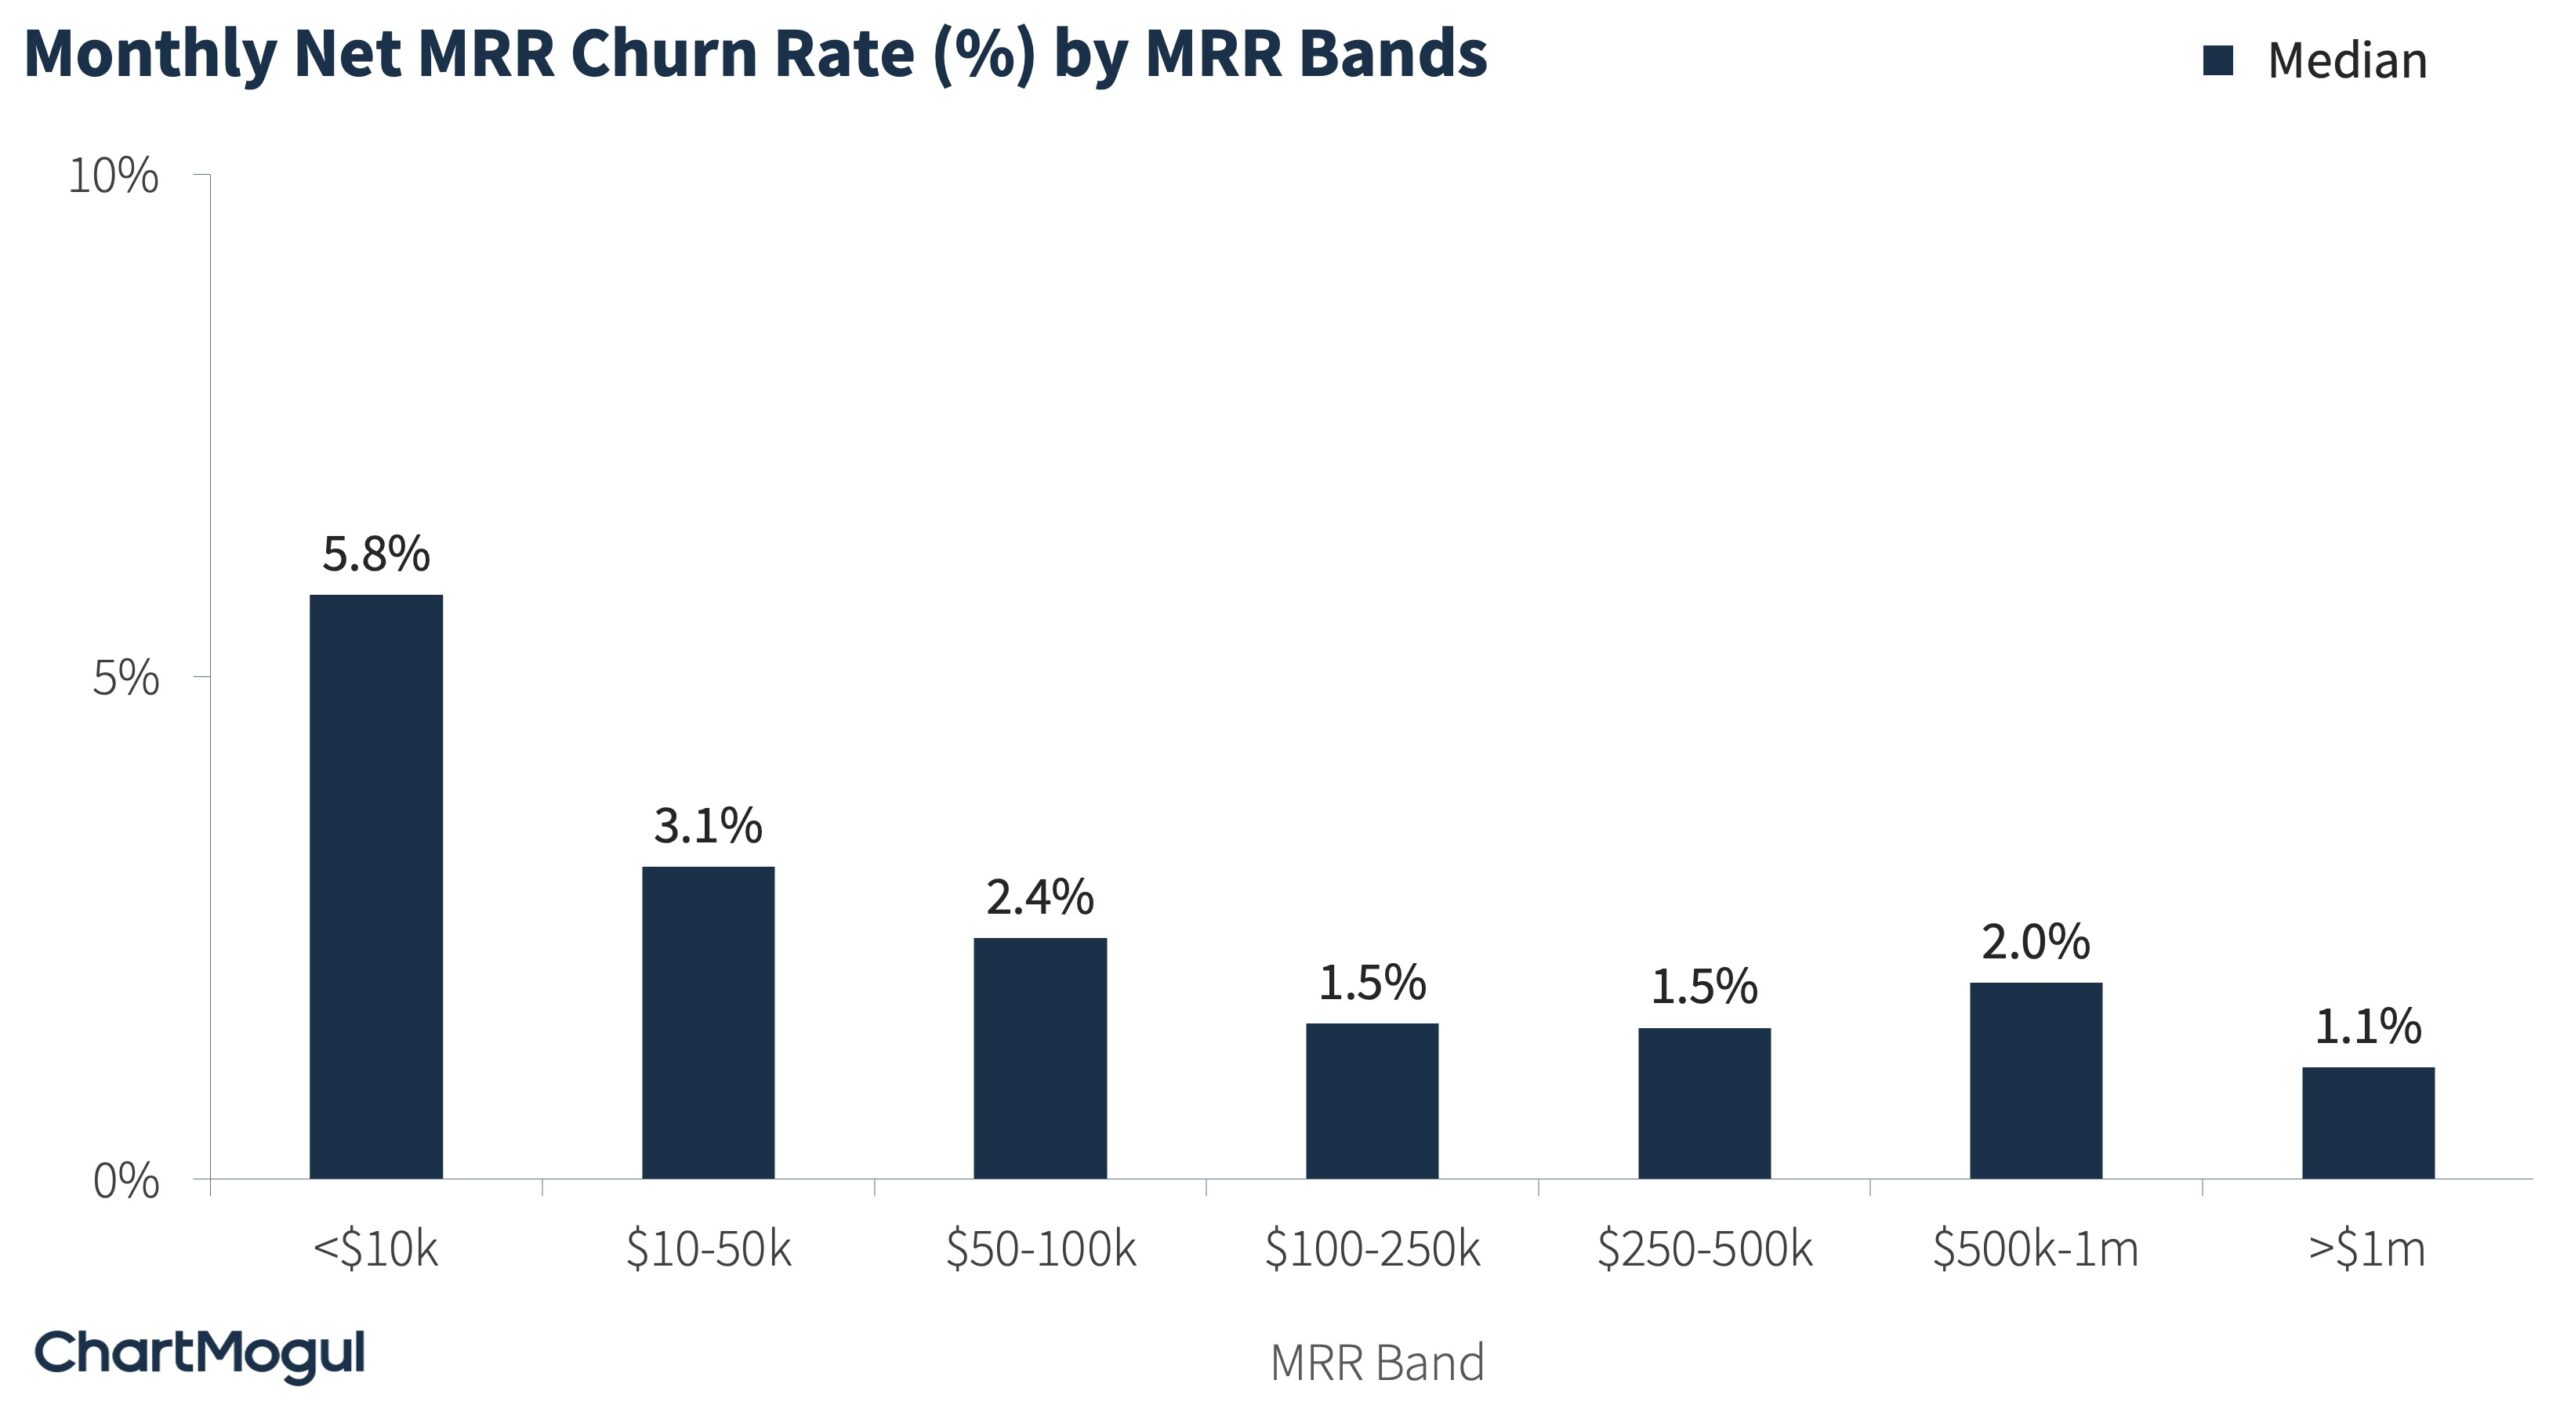 Net MRR Churn Rate by MRR Bands